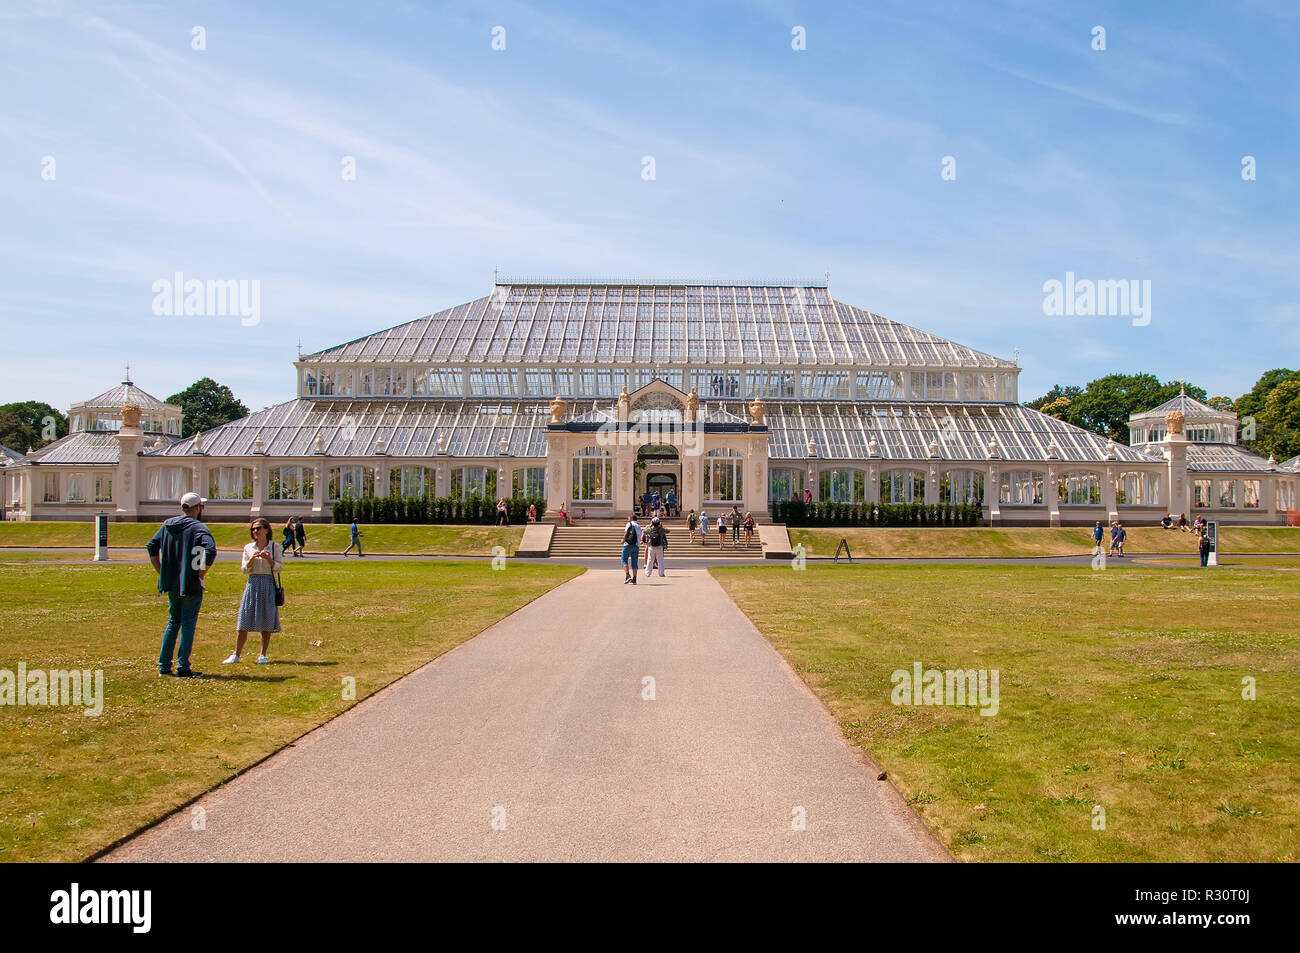 LONDON - JUN 24: View of the Temperate House from the Kew Gardens on June 24, 2018 in London, United Kingdom. Stock Photo